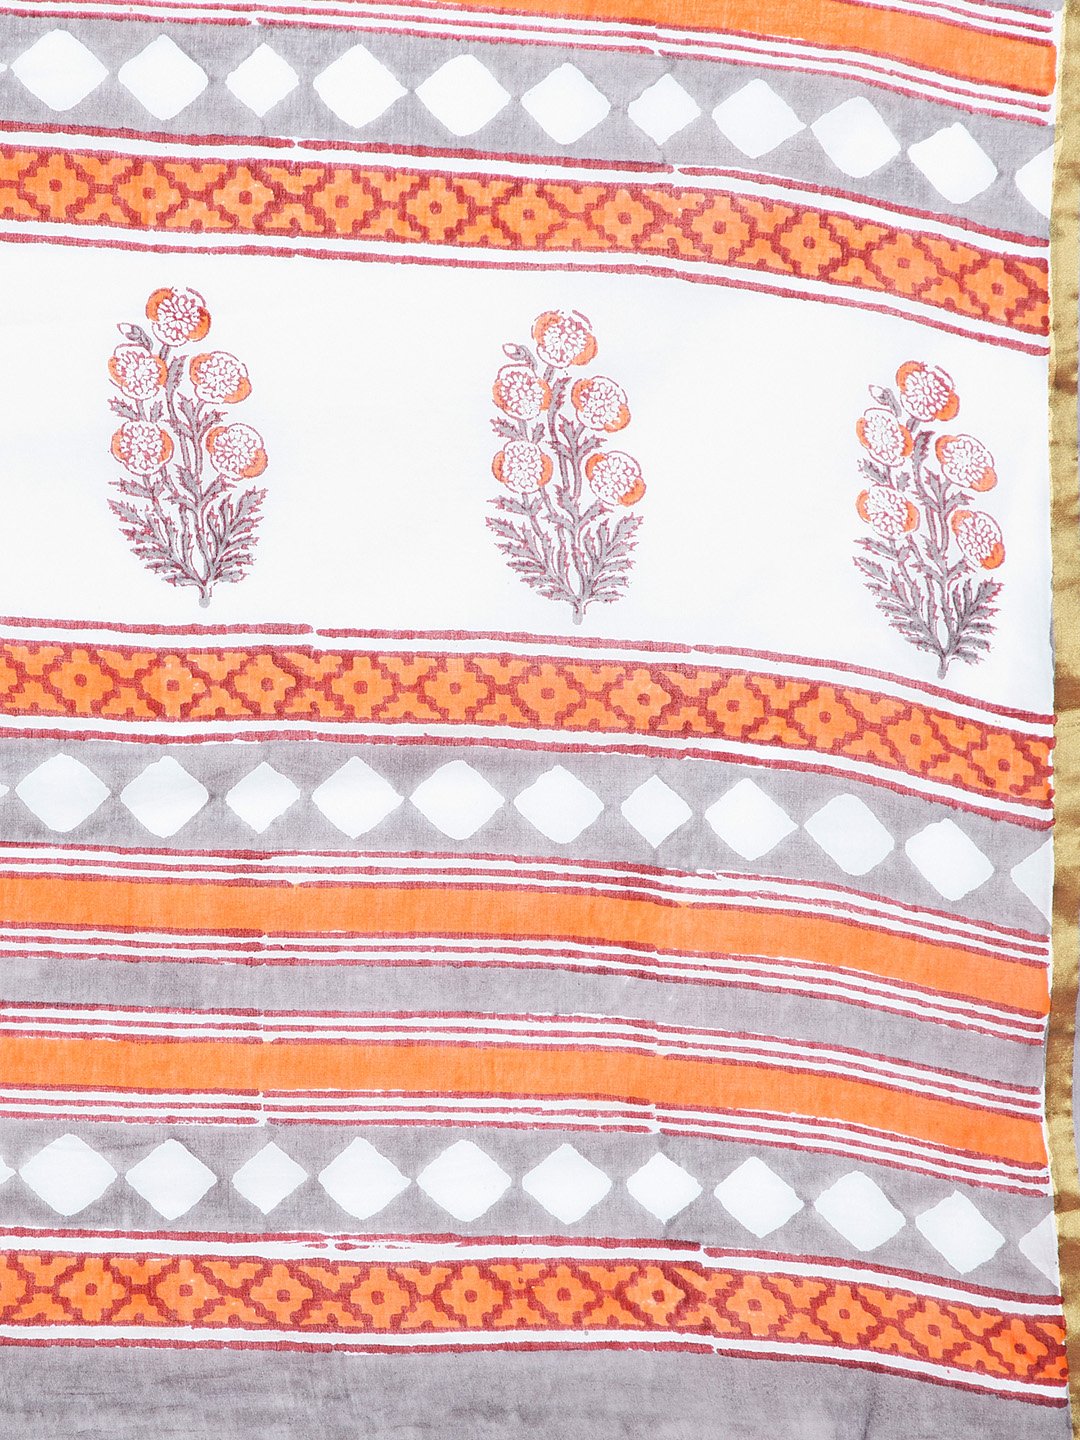 White & Orange Mughal Hand Block Print Handcrafted Cotton Saree-Saree-Kalakari India-BHKPSA0024-Cotton, Geographical Indication, Hand Blocks, Hand Crafted, Heritage Prints, Sanganeri, Sarees, Sustainable Fabrics-[Linen,Ethnic,wear,Fashionista,Handloom,Handicraft,Indigo,blockprint,block,print,Cotton,Chanderi,Blue, latest,classy,party,bollywood,trendy,summer,style,traditional,formal,elegant,unique,style,hand,block,print, dabu,booti,gift,present,glamorous,affordable,collectible,Sari,Saree,printed, 